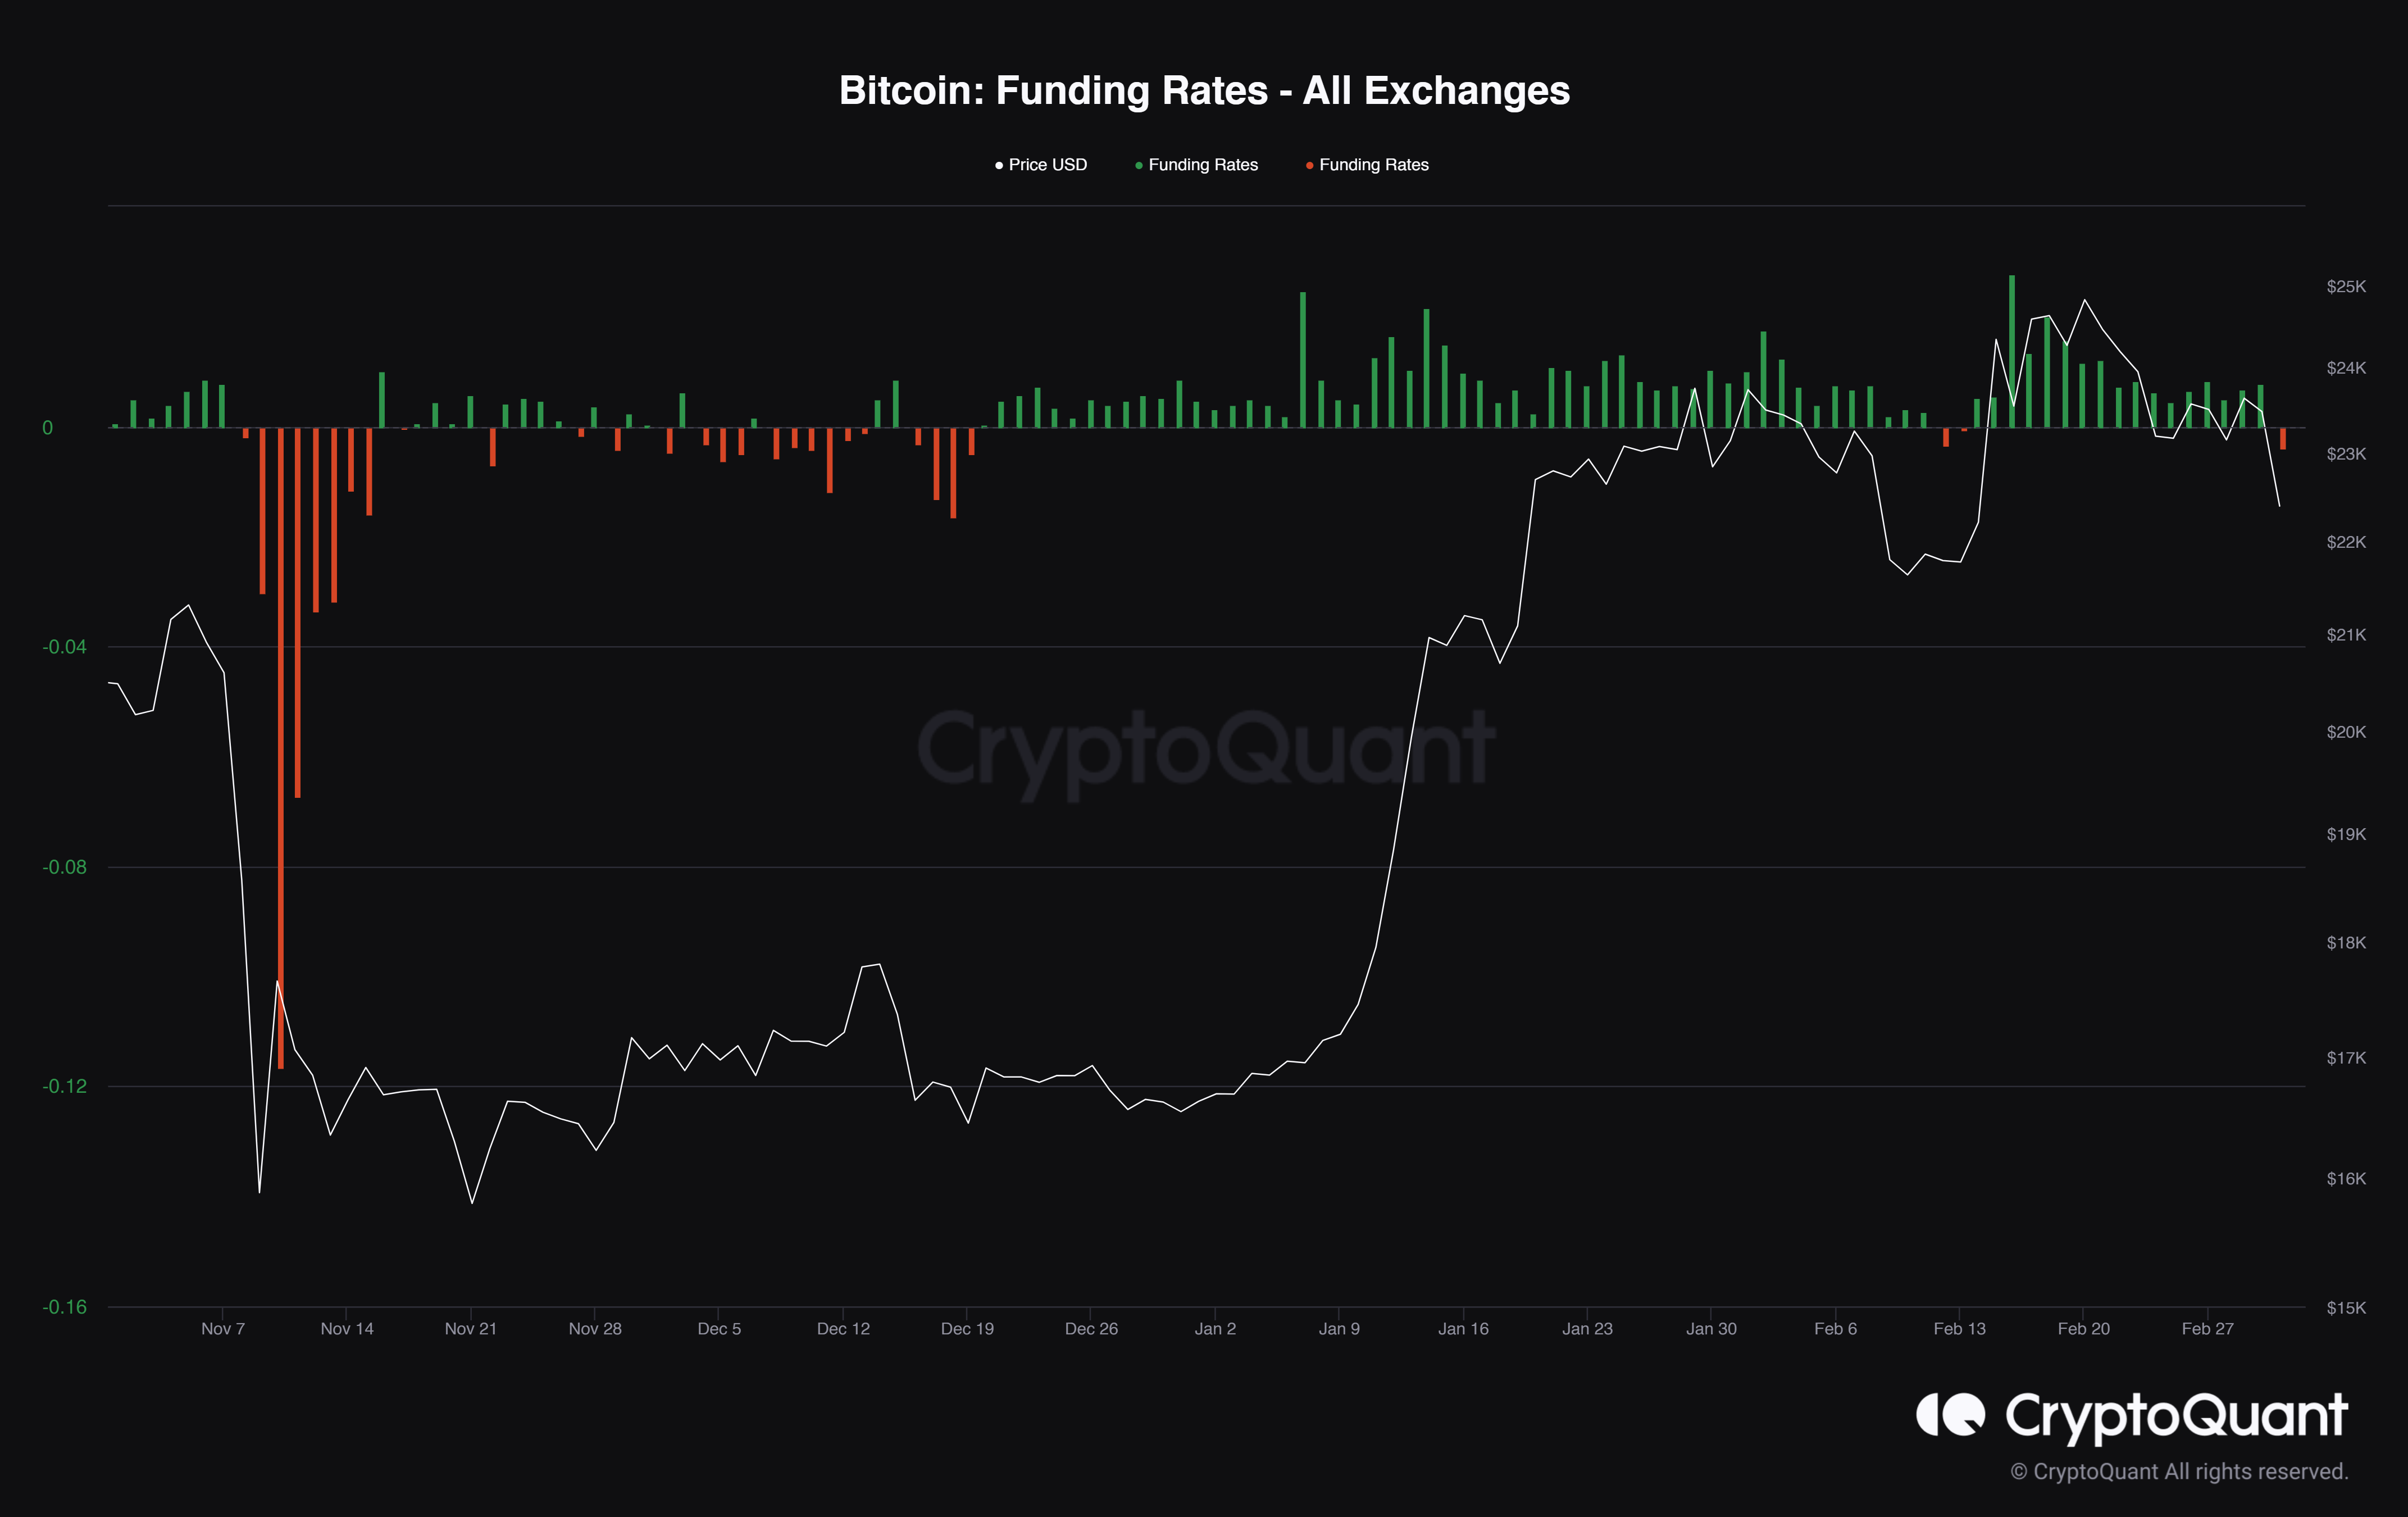 Bitcoin Funding Rates - All Exchanges